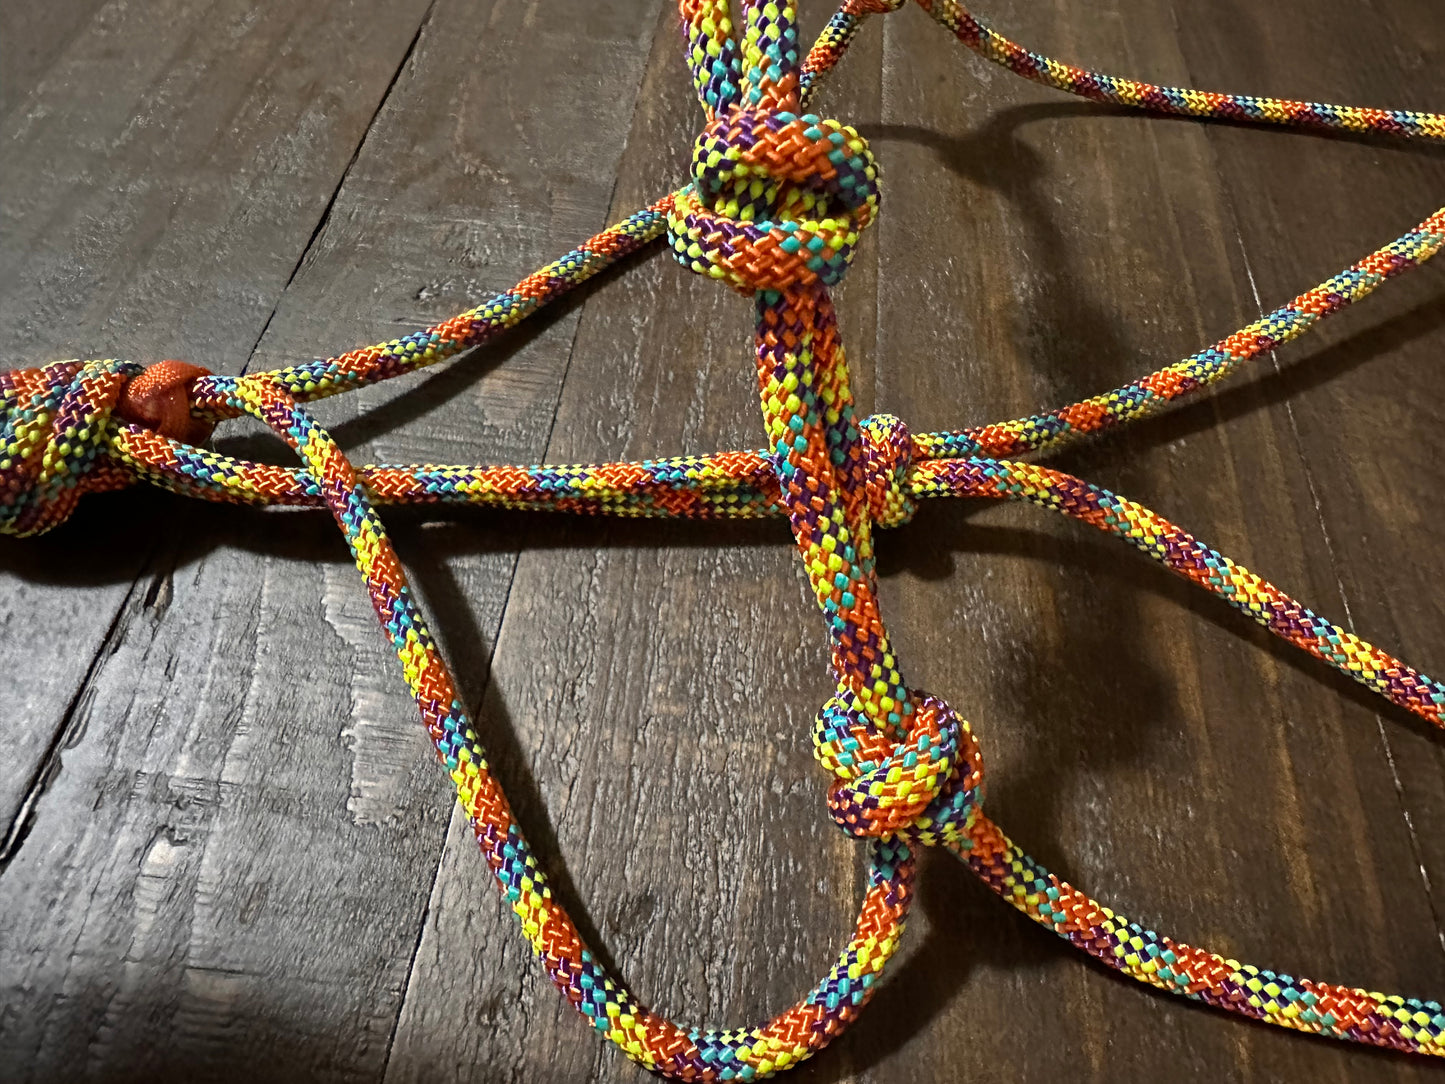 4 Knot Rope Halters - Average Horse